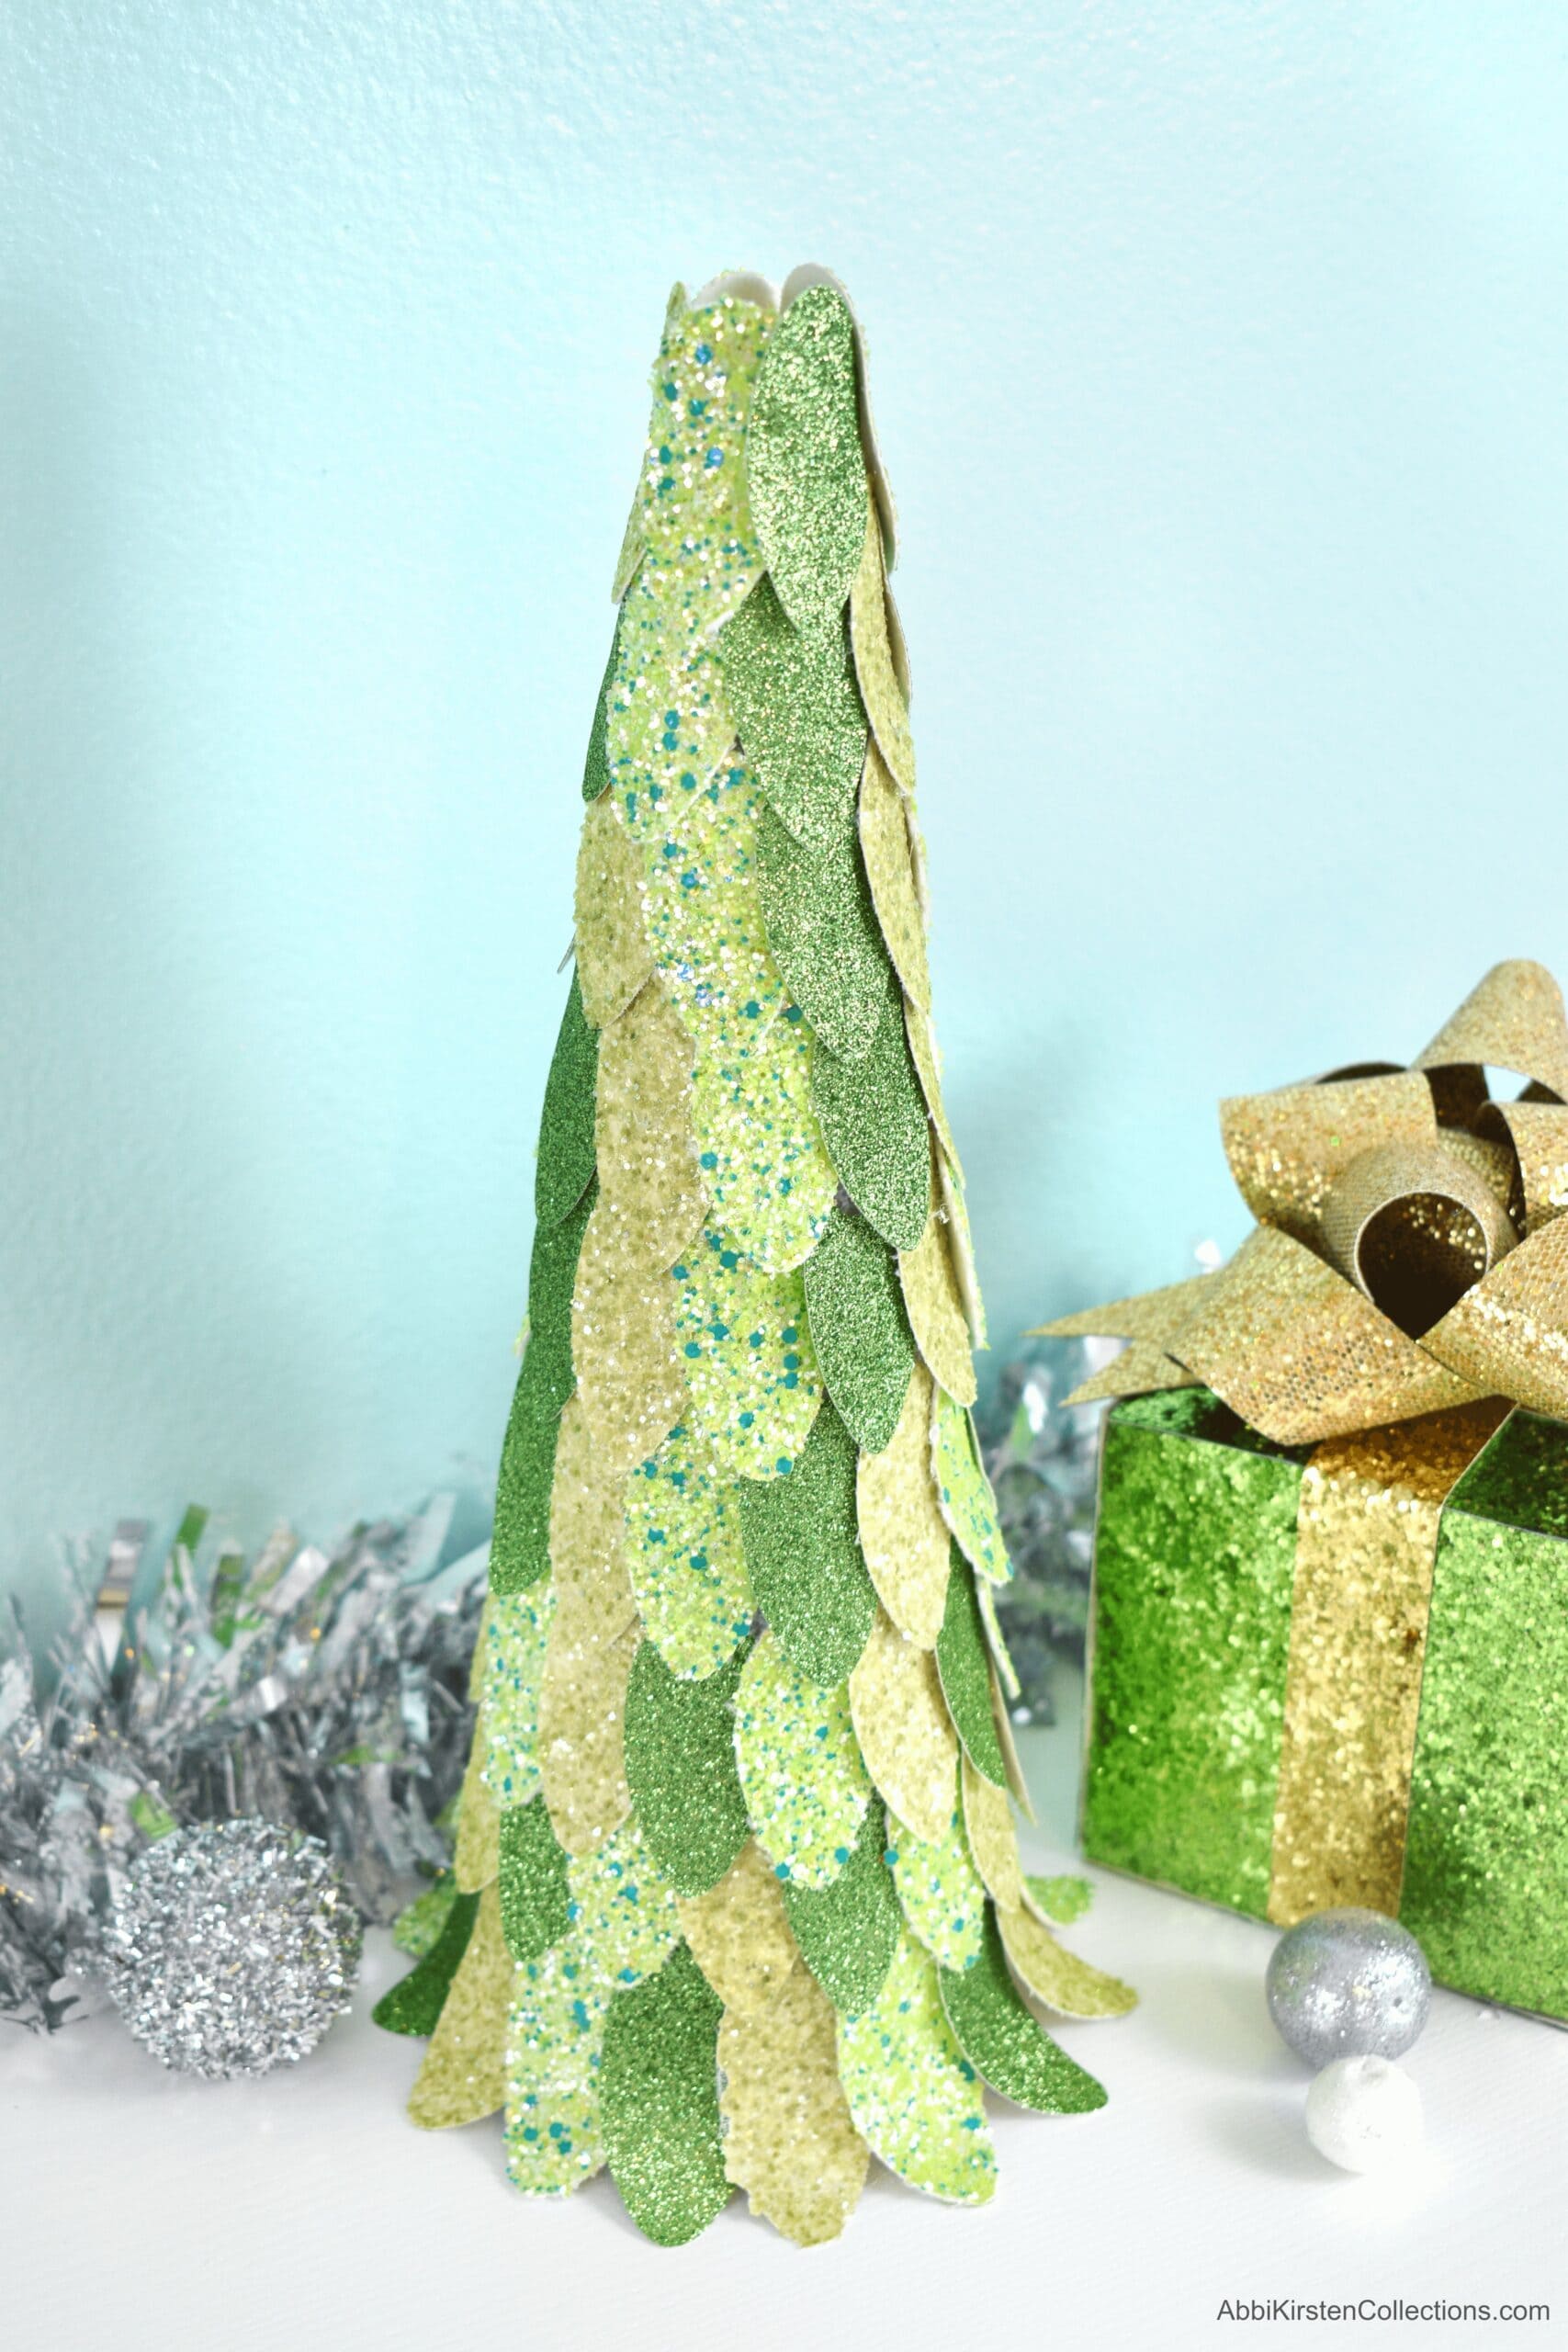 A tall, glittery green Christmas tree is made from layers of faux leather petals attached to a simple styrofoam crafting cone. In the background are a light blue backdrop, silver garland, and a green and gold wrapped present.